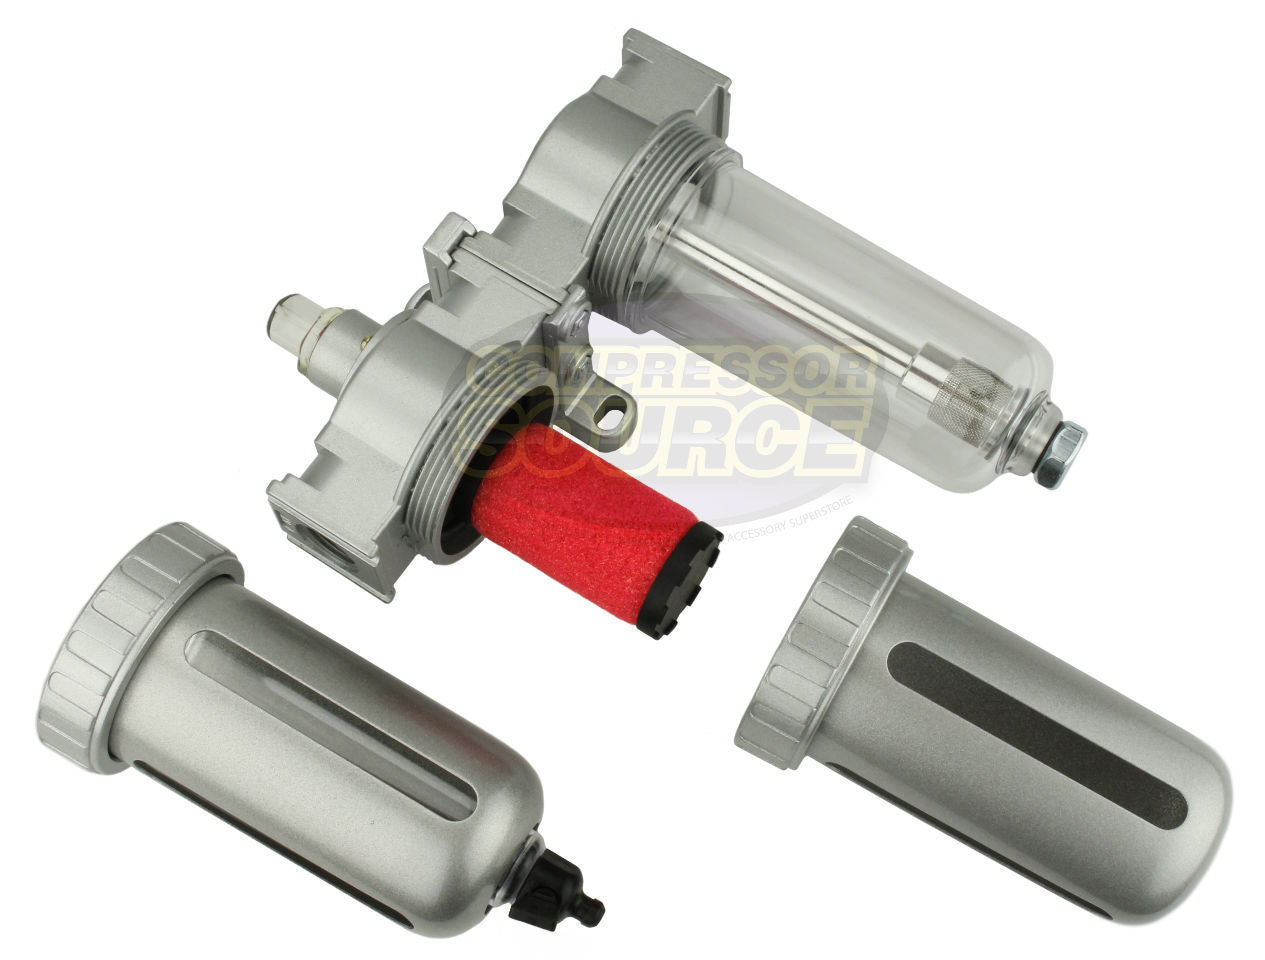 3/8" Compressed Air In Line Filter And Desiccant Dryer Combo for use with Plasma Cutters